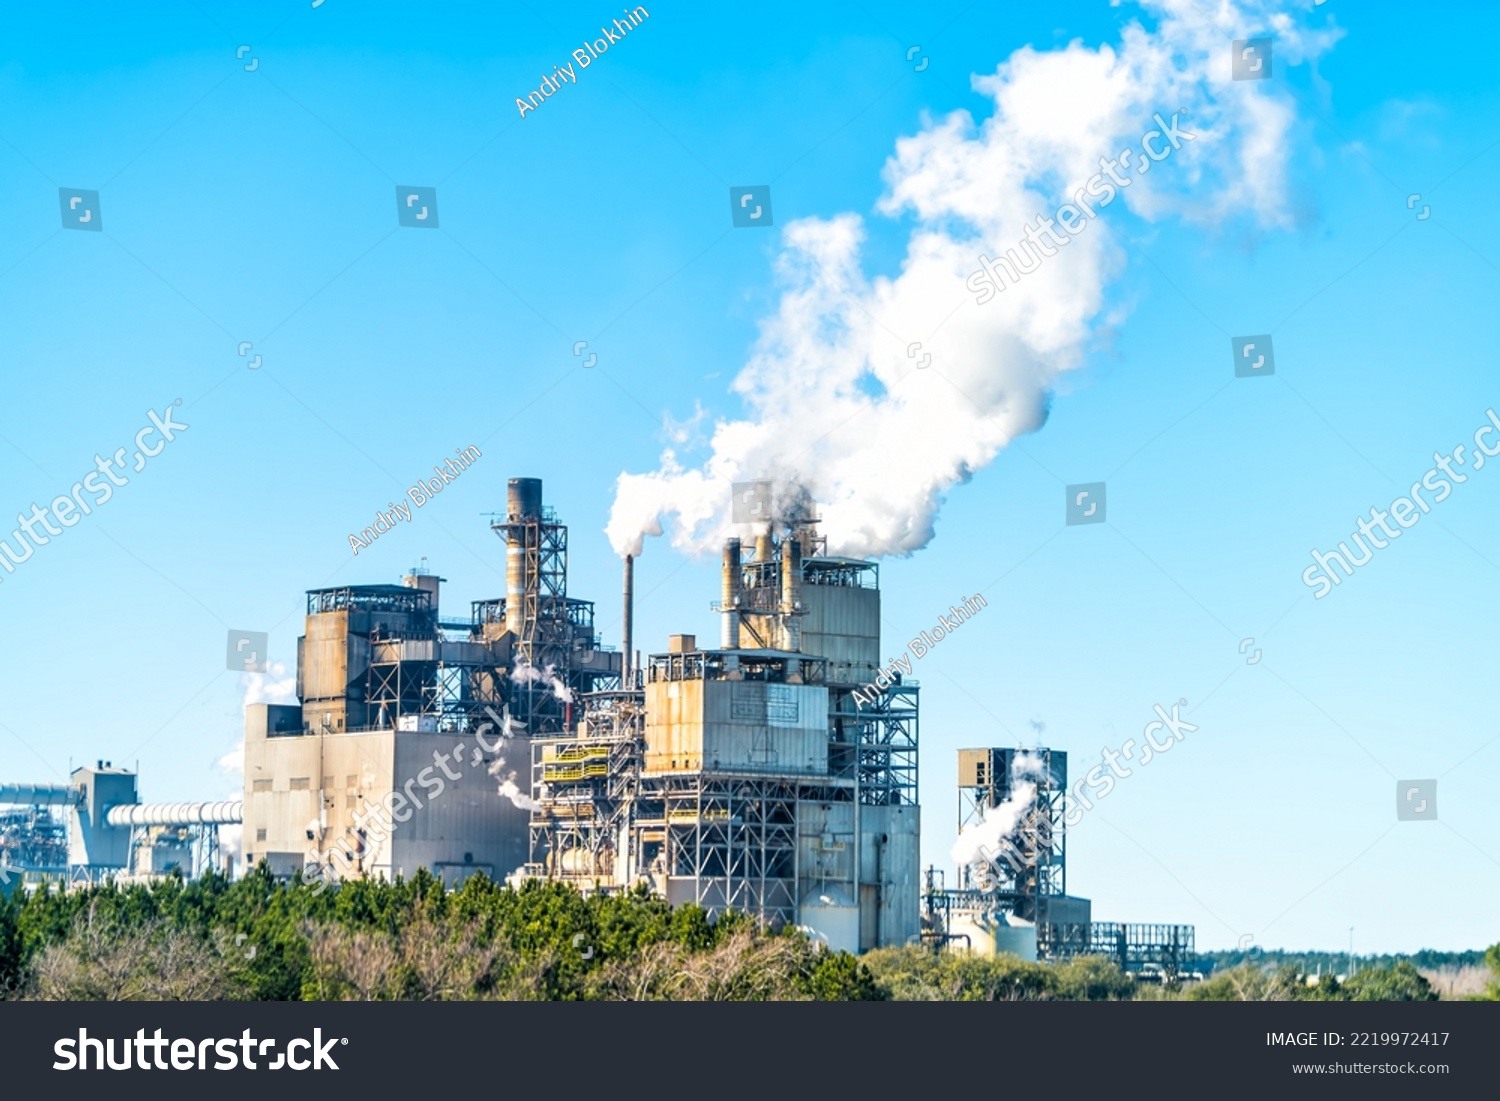 Industrial paper mill factory plant with chimney smokestacks stacks emitting carbon dioxide emission pollution in Georgetown, South Carolina town #2219972417